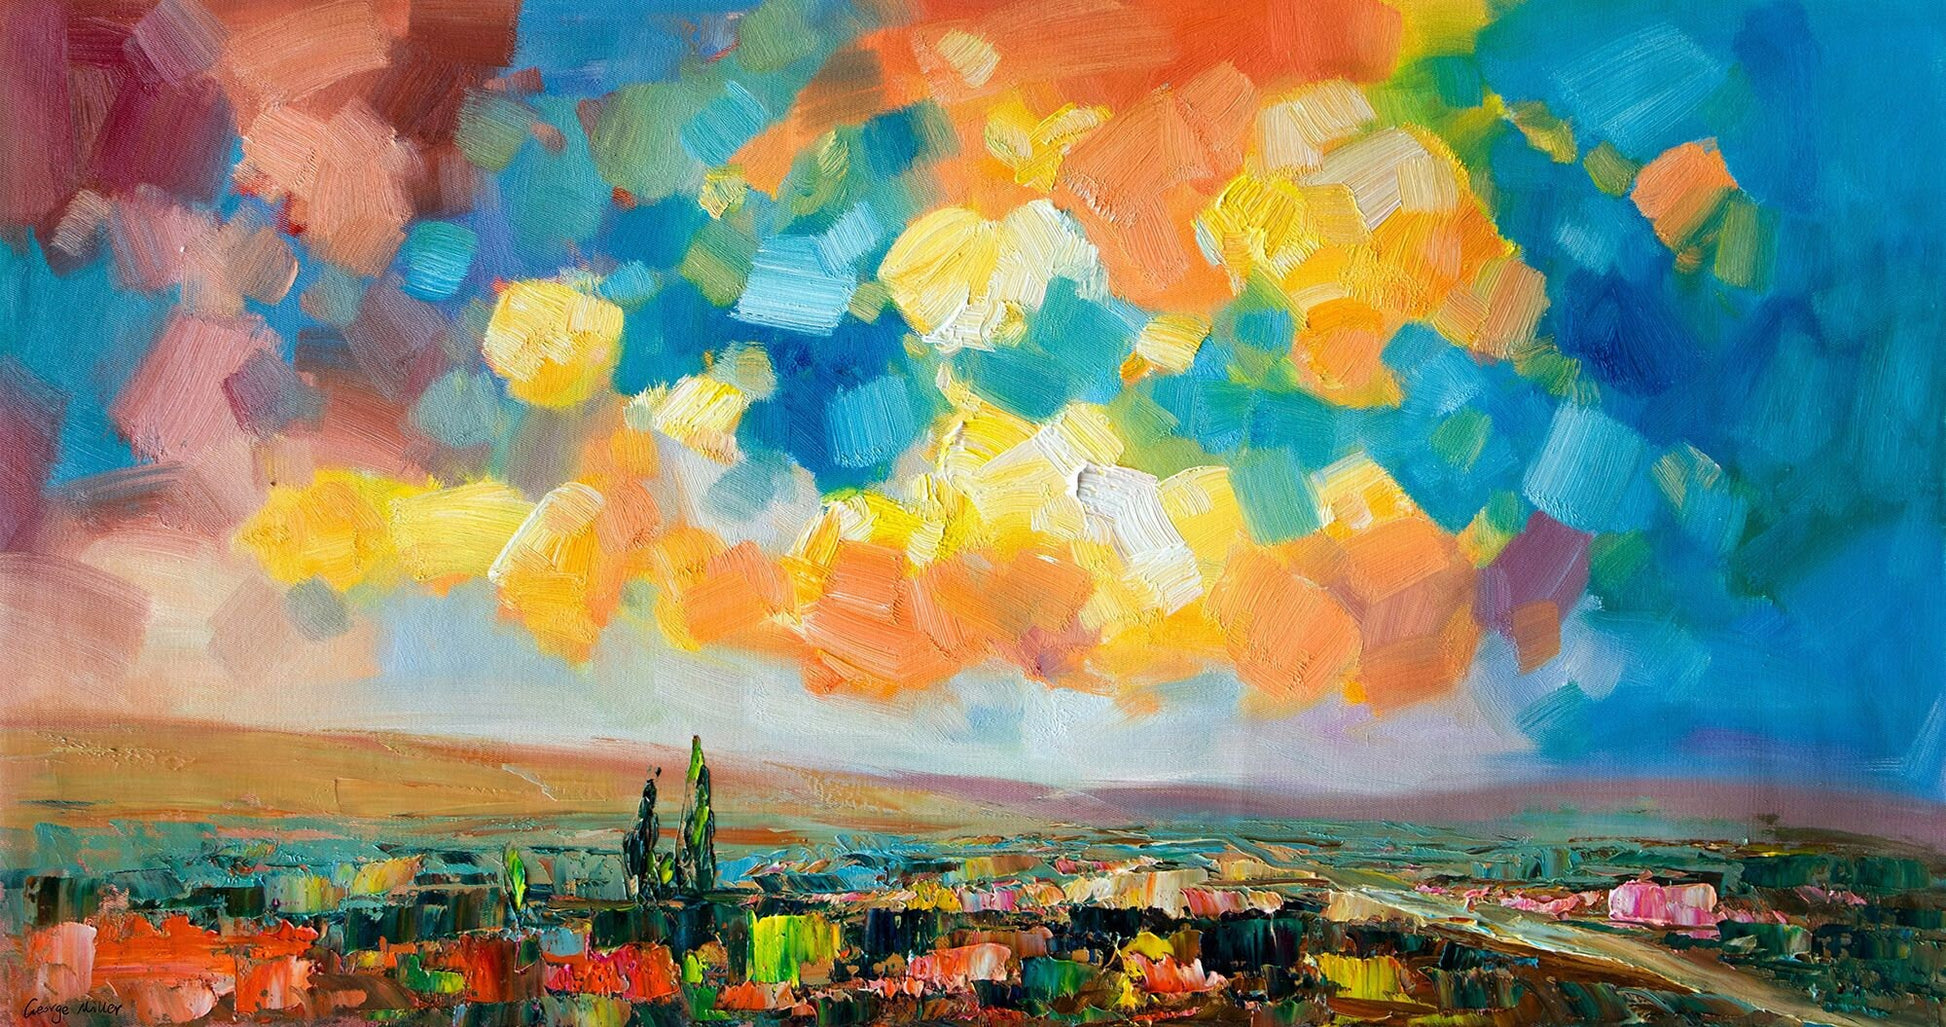 Abstract Painting, Oil Painting Original, Canvas Art, Large Wall Art, Fantasy, Oil Painting Abstract, Contemporary Art, Landscape, 24x48"